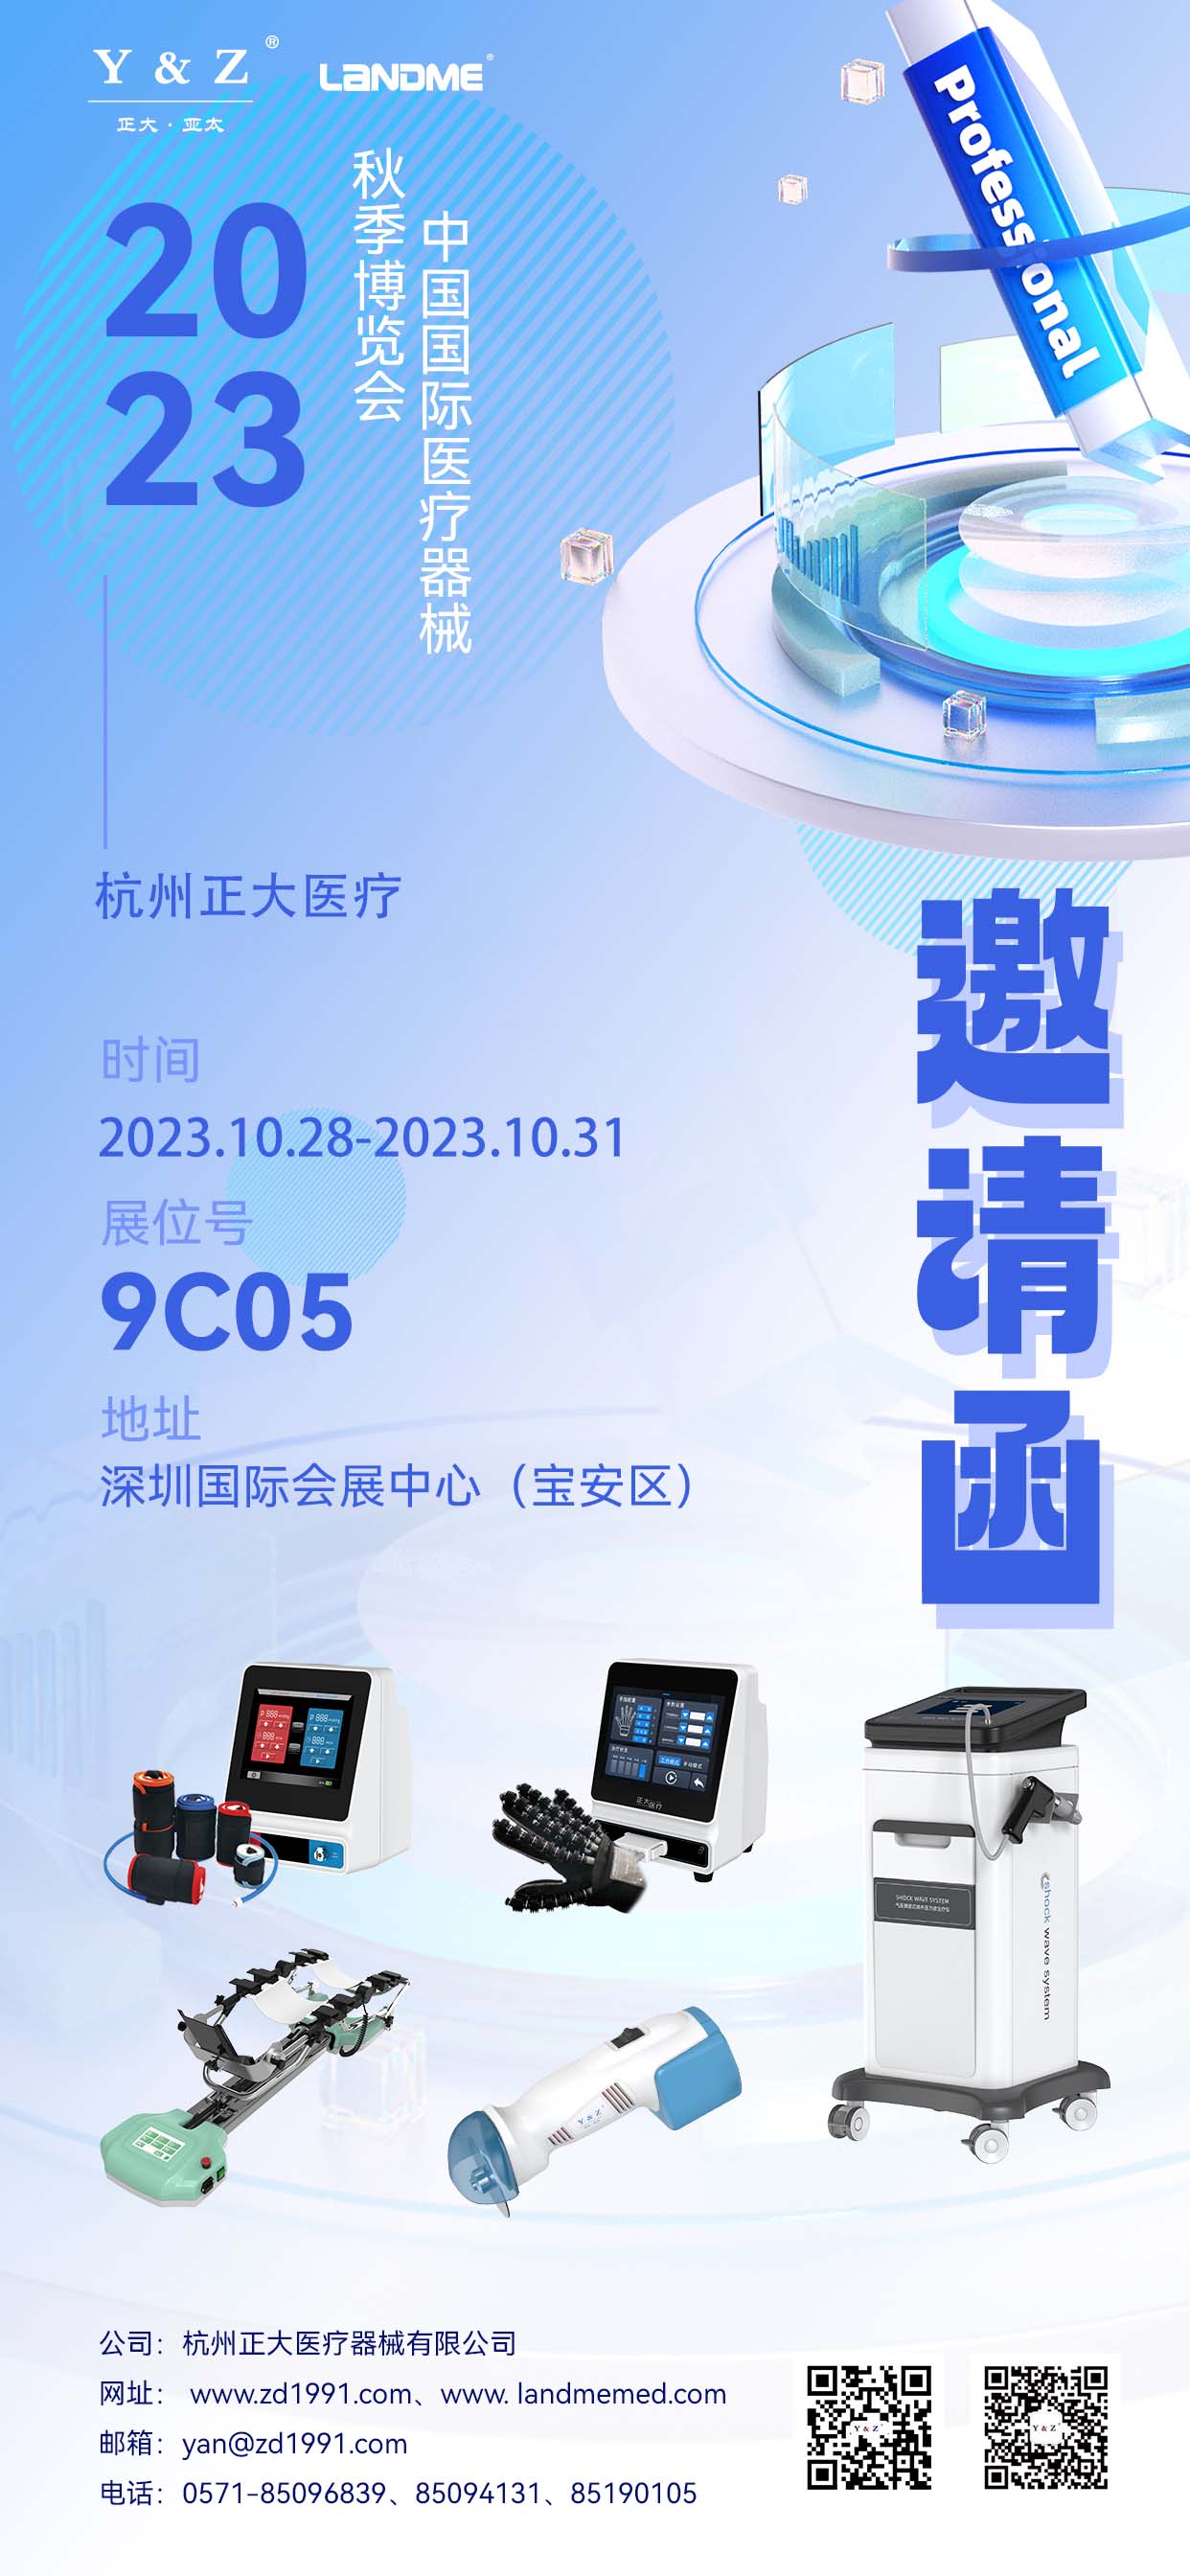 Exhibition Invitation丨The 88th China International Medical Equipment (Autumn) Expo CMEF, Chia Tai Medical invites you to meet in Shenzhen